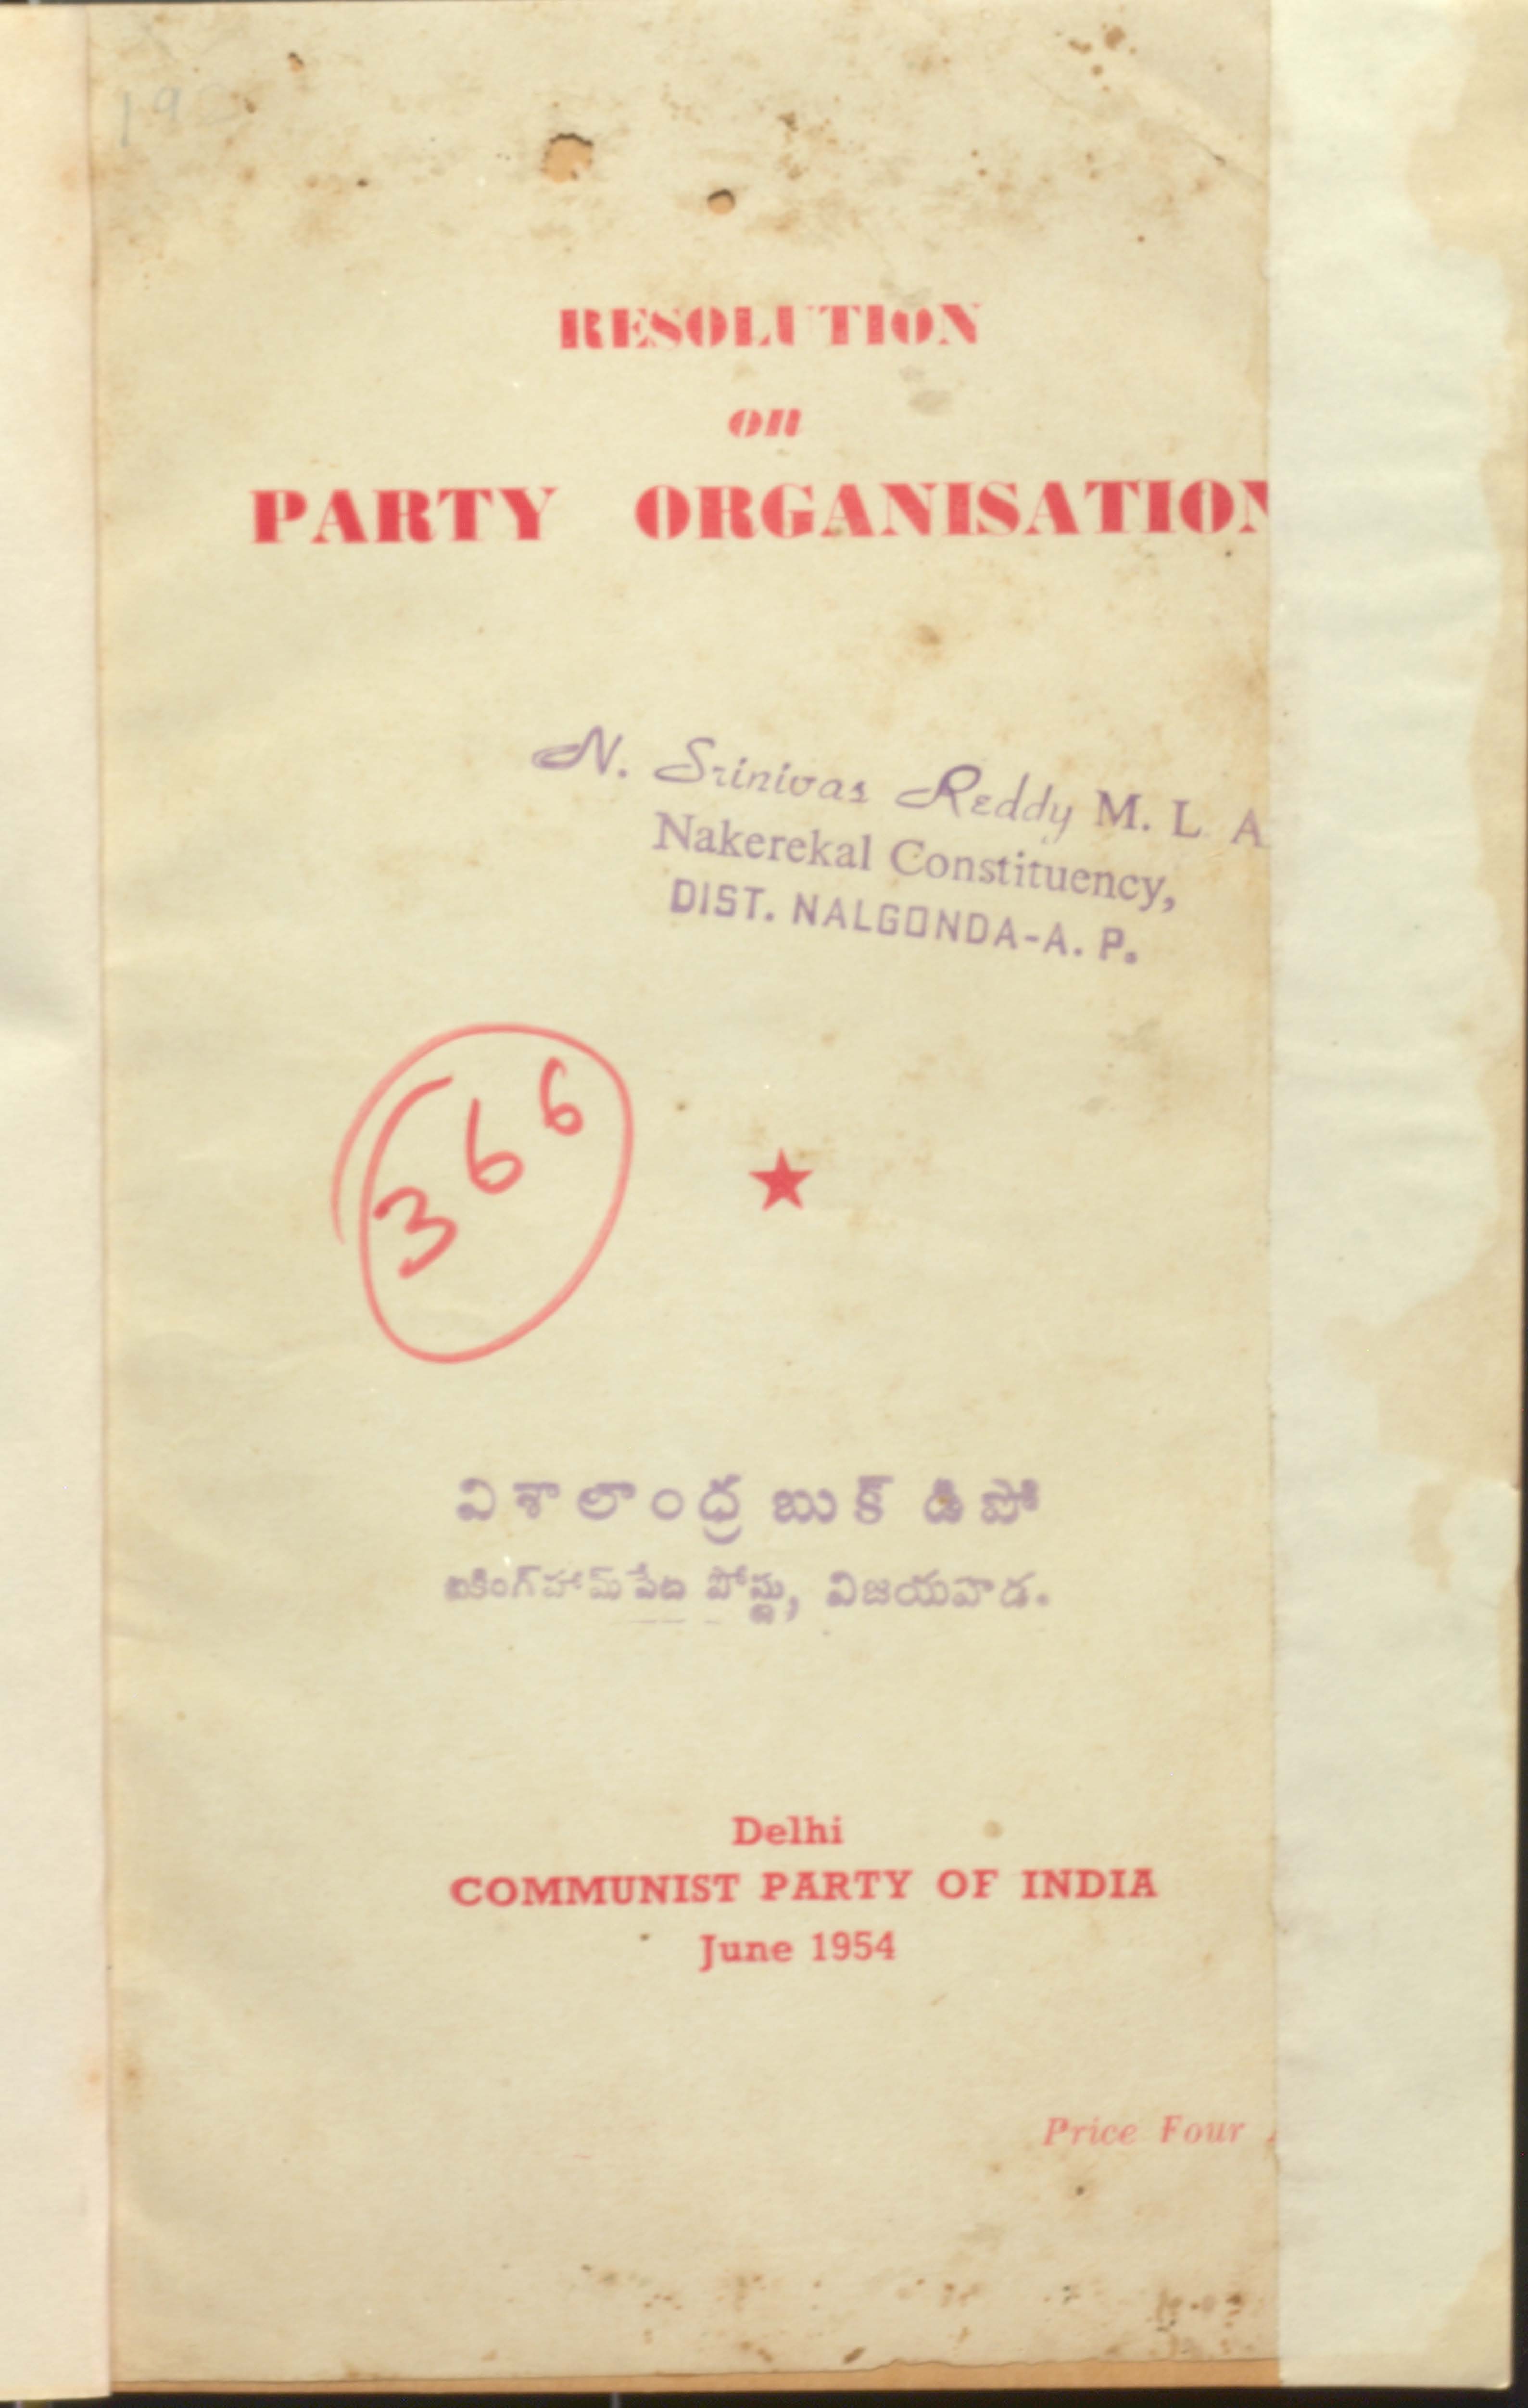 Resolution On Party Organisation (June 1954)